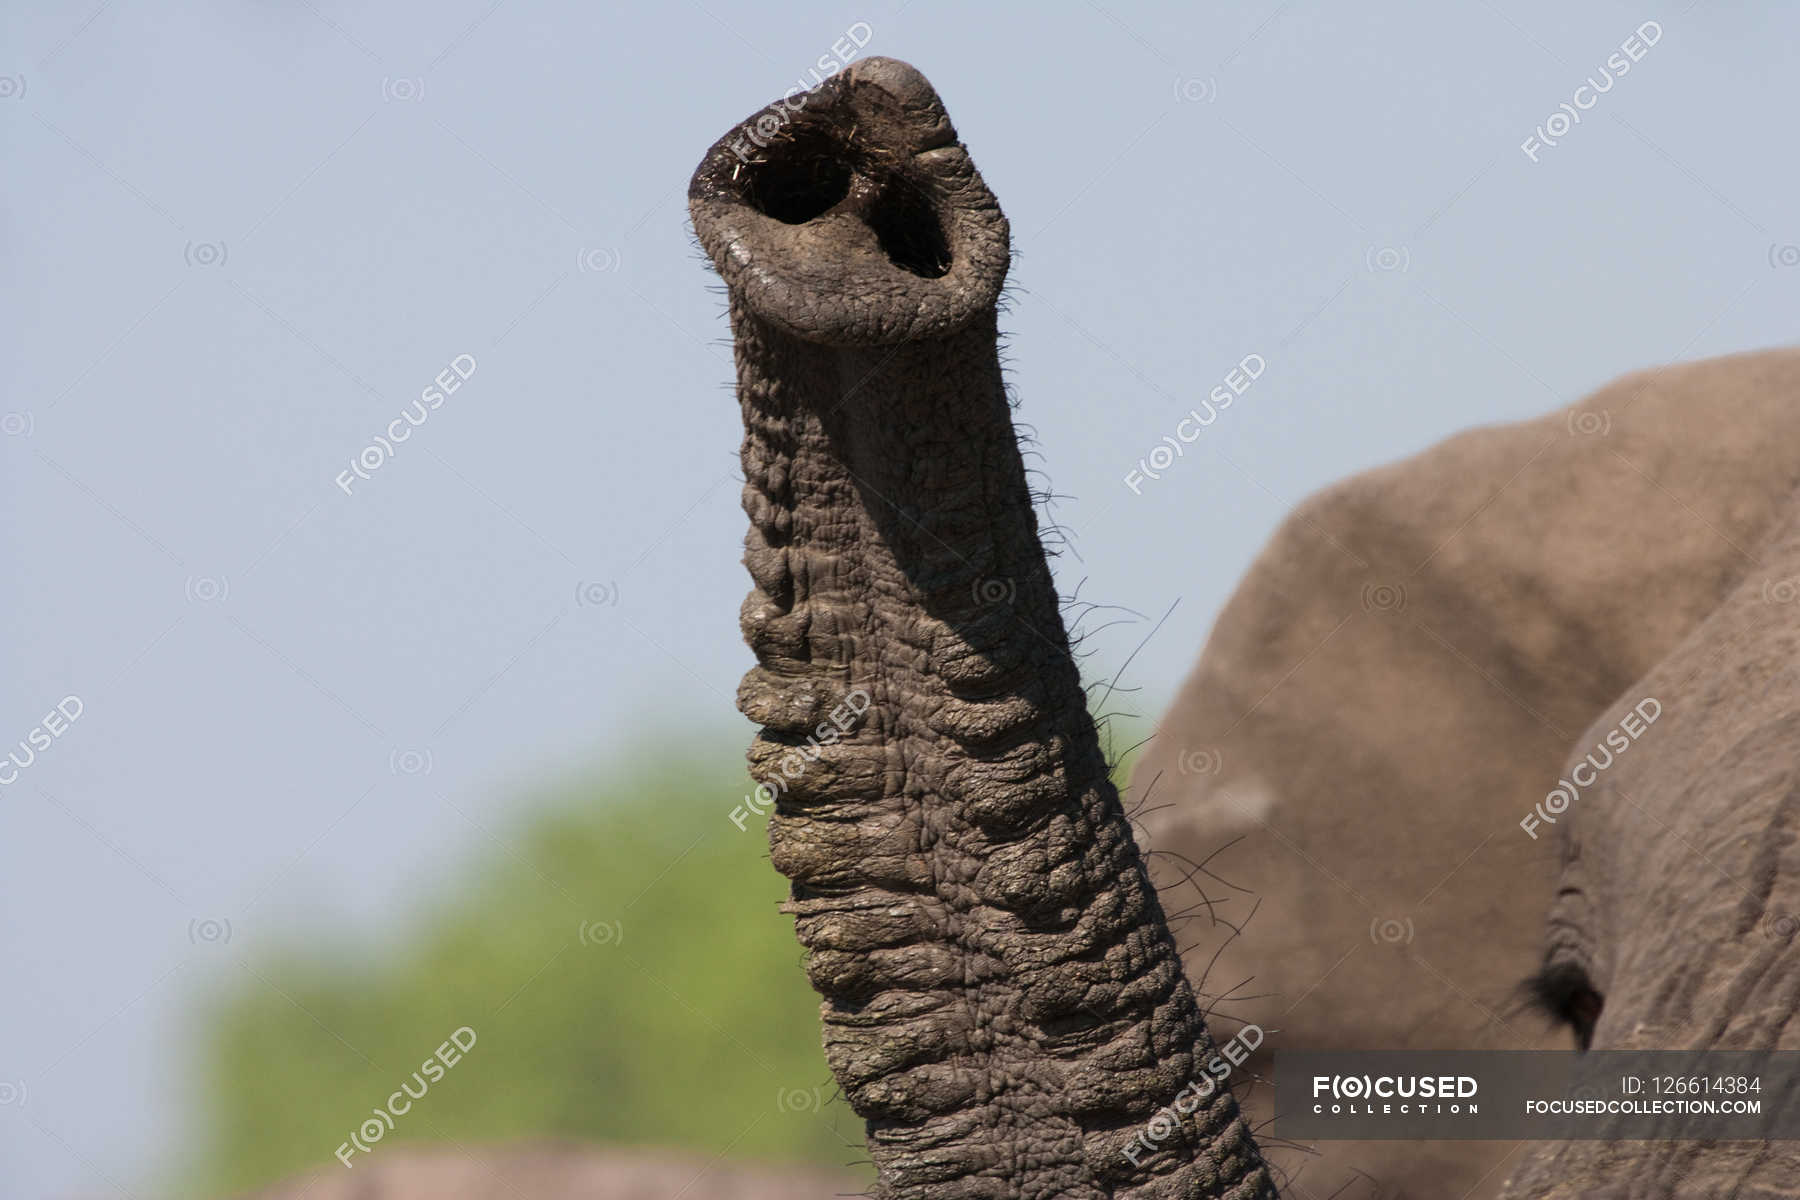 African elephant trunk — Animals In The Wild, landscape - Stock Photo |  #126614384